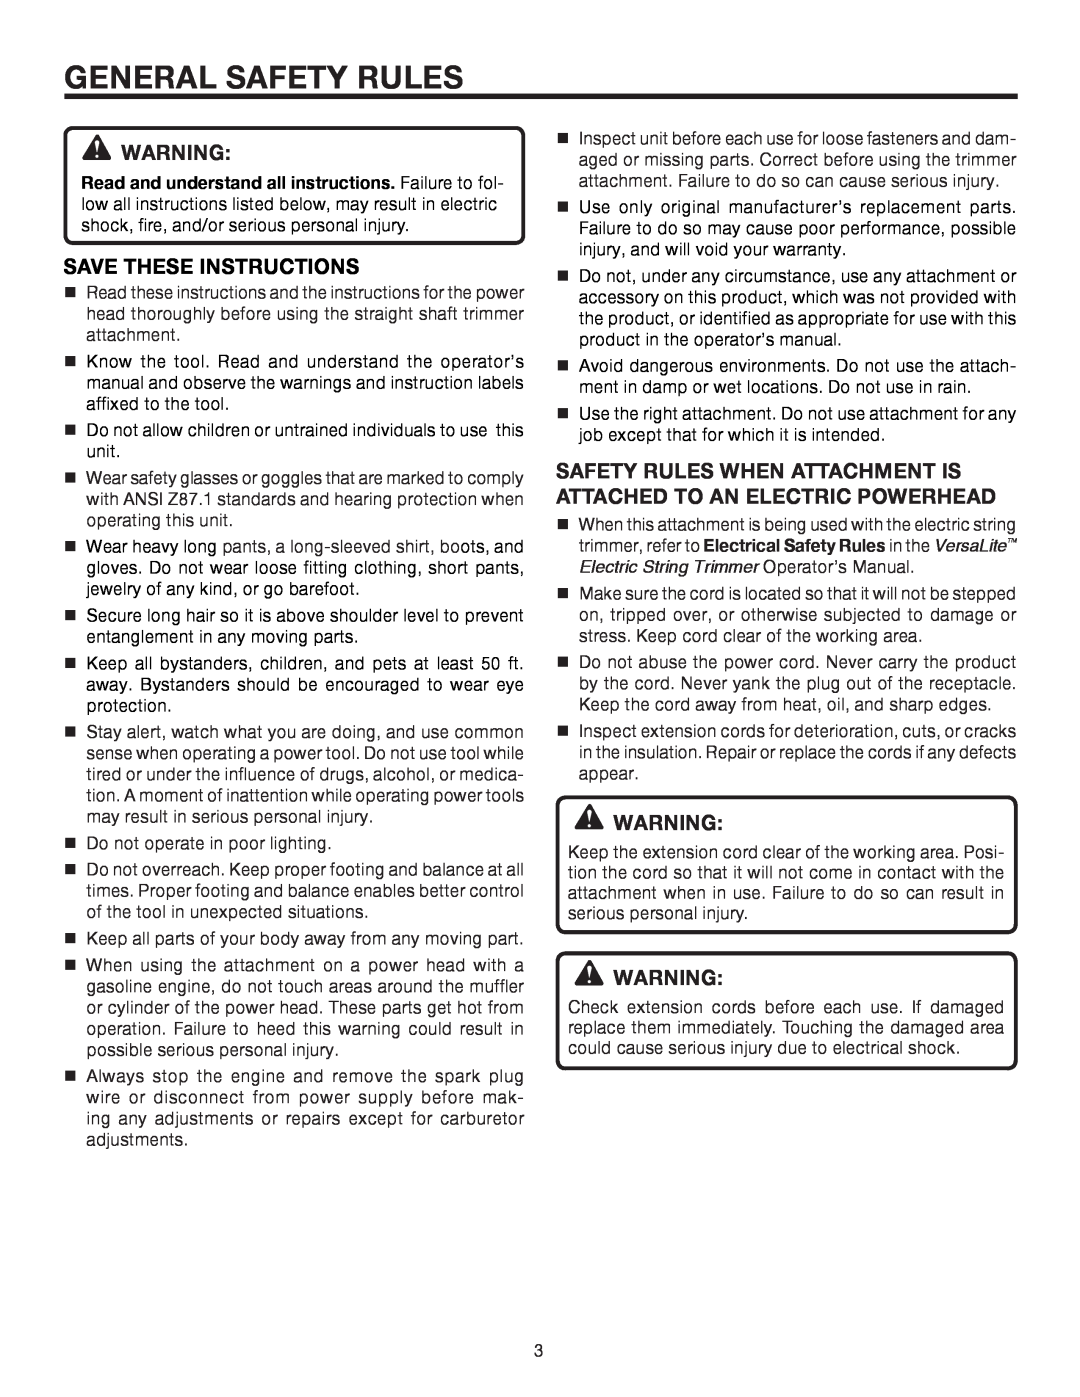 Ryobi UT15702B manual General Safety Rules, Save These Instructions 